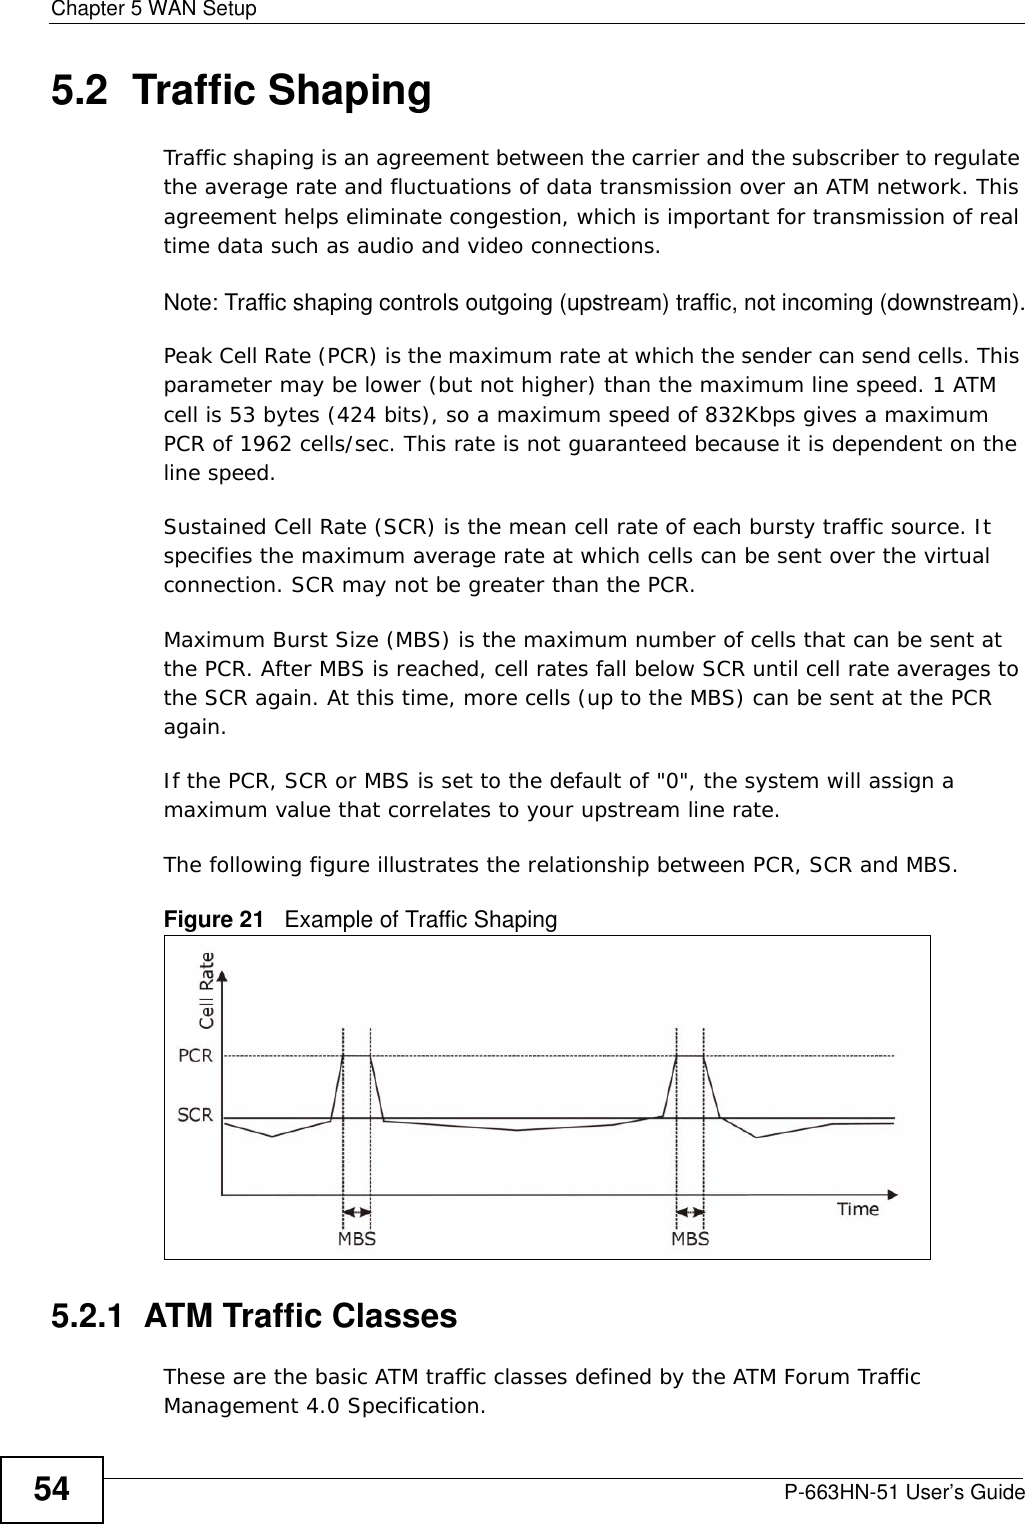 Chapter 5 WAN SetupP-663HN-51 User’s Guide545.2  Traffic ShapingTraffic shaping is an agreement between the carrier and the subscriber to regulate the average rate and fluctuations of data transmission over an ATM network. This agreement helps eliminate congestion, which is important for transmission of real time data such as audio and video connections.Note: Traffic shaping controls outgoing (upstream) traffic, not incoming (downstream).Peak Cell Rate (PCR) is the maximum rate at which the sender can send cells. This parameter may be lower (but not higher) than the maximum line speed. 1 ATM cell is 53 bytes (424 bits), so a maximum speed of 832Kbps gives a maximum PCR of 1962 cells/sec. This rate is not guaranteed because it is dependent on the line speed.Sustained Cell Rate (SCR) is the mean cell rate of each bursty traffic source. It specifies the maximum average rate at which cells can be sent over the virtual connection. SCR may not be greater than the PCR.Maximum Burst Size (MBS) is the maximum number of cells that can be sent at the PCR. After MBS is reached, cell rates fall below SCR until cell rate averages to the SCR again. At this time, more cells (up to the MBS) can be sent at the PCR again.If the PCR, SCR or MBS is set to the default of &quot;0&quot;, the system will assign a maximum value that correlates to your upstream line rate. The following figure illustrates the relationship between PCR, SCR and MBS. Figure 21   Example of Traffic Shaping5.2.1  ATM Traffic ClassesThese are the basic ATM traffic classes defined by the ATM Forum Traffic Management 4.0 Specification. 